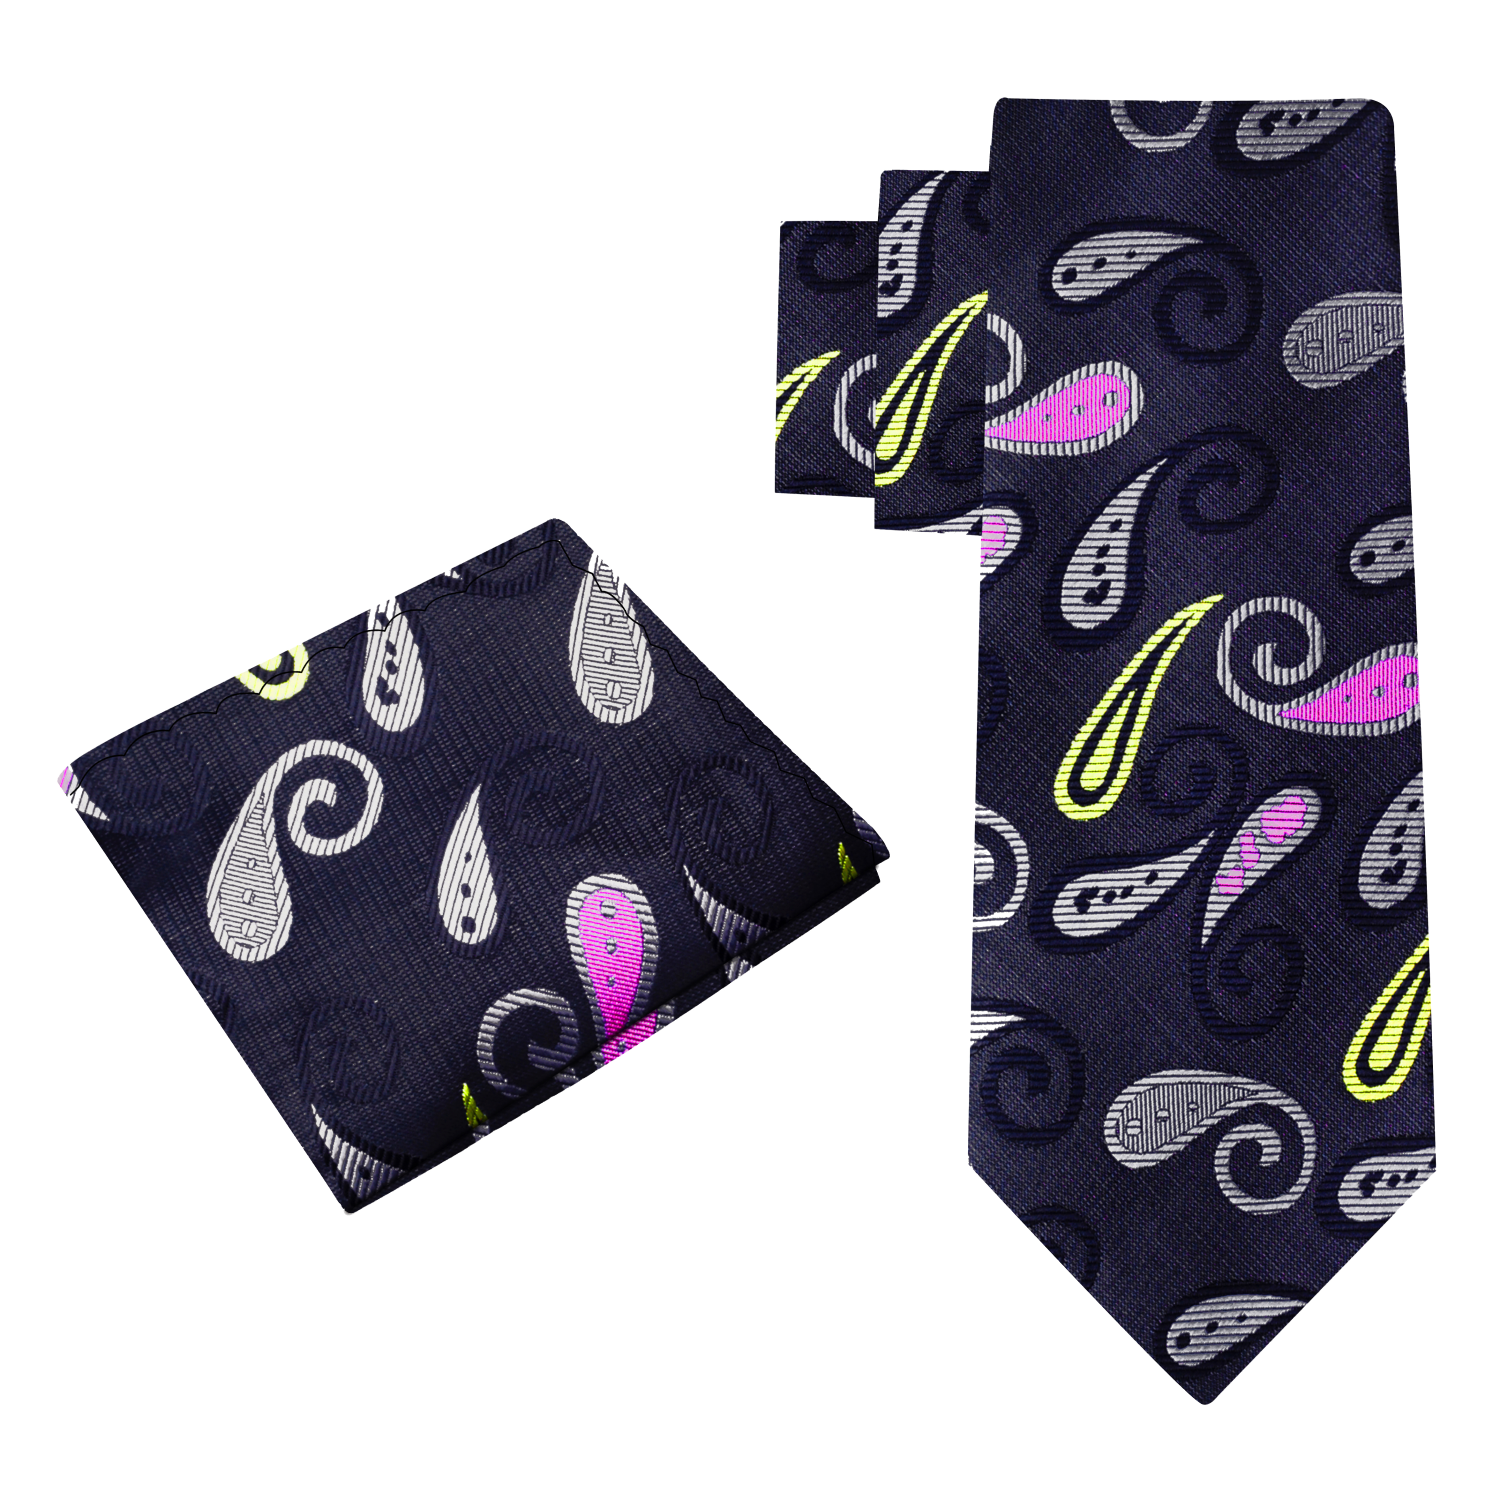 View 2: Black Grey Pink Enchanted Paisley Necktie and Square